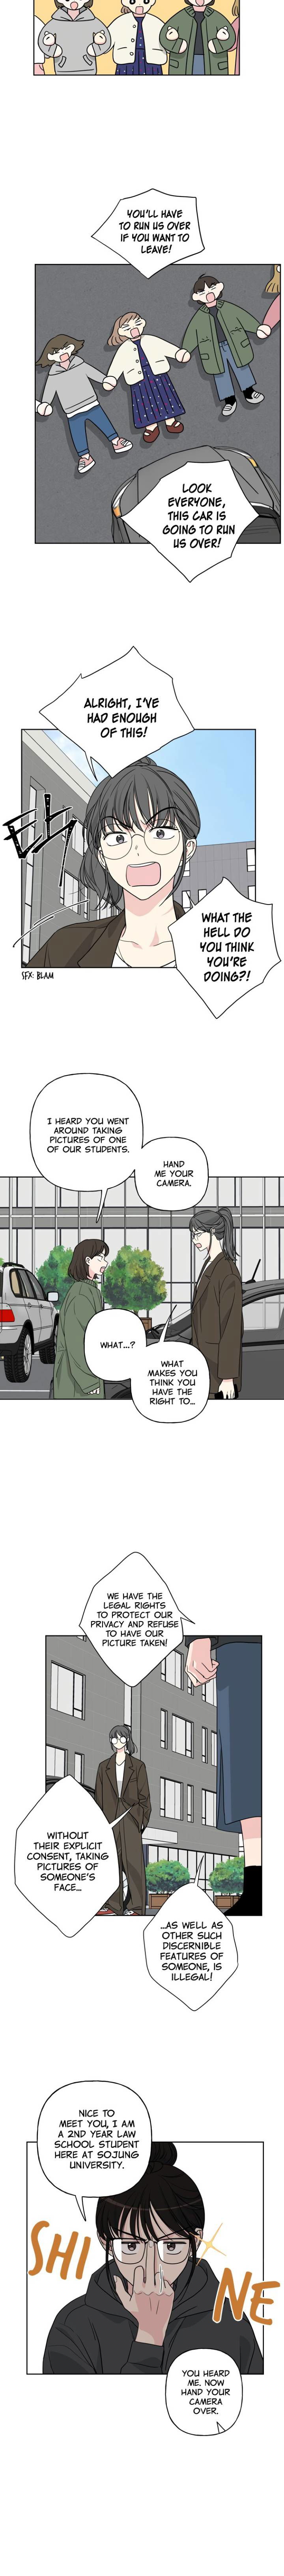 mother-im-sorry-chap-30-9